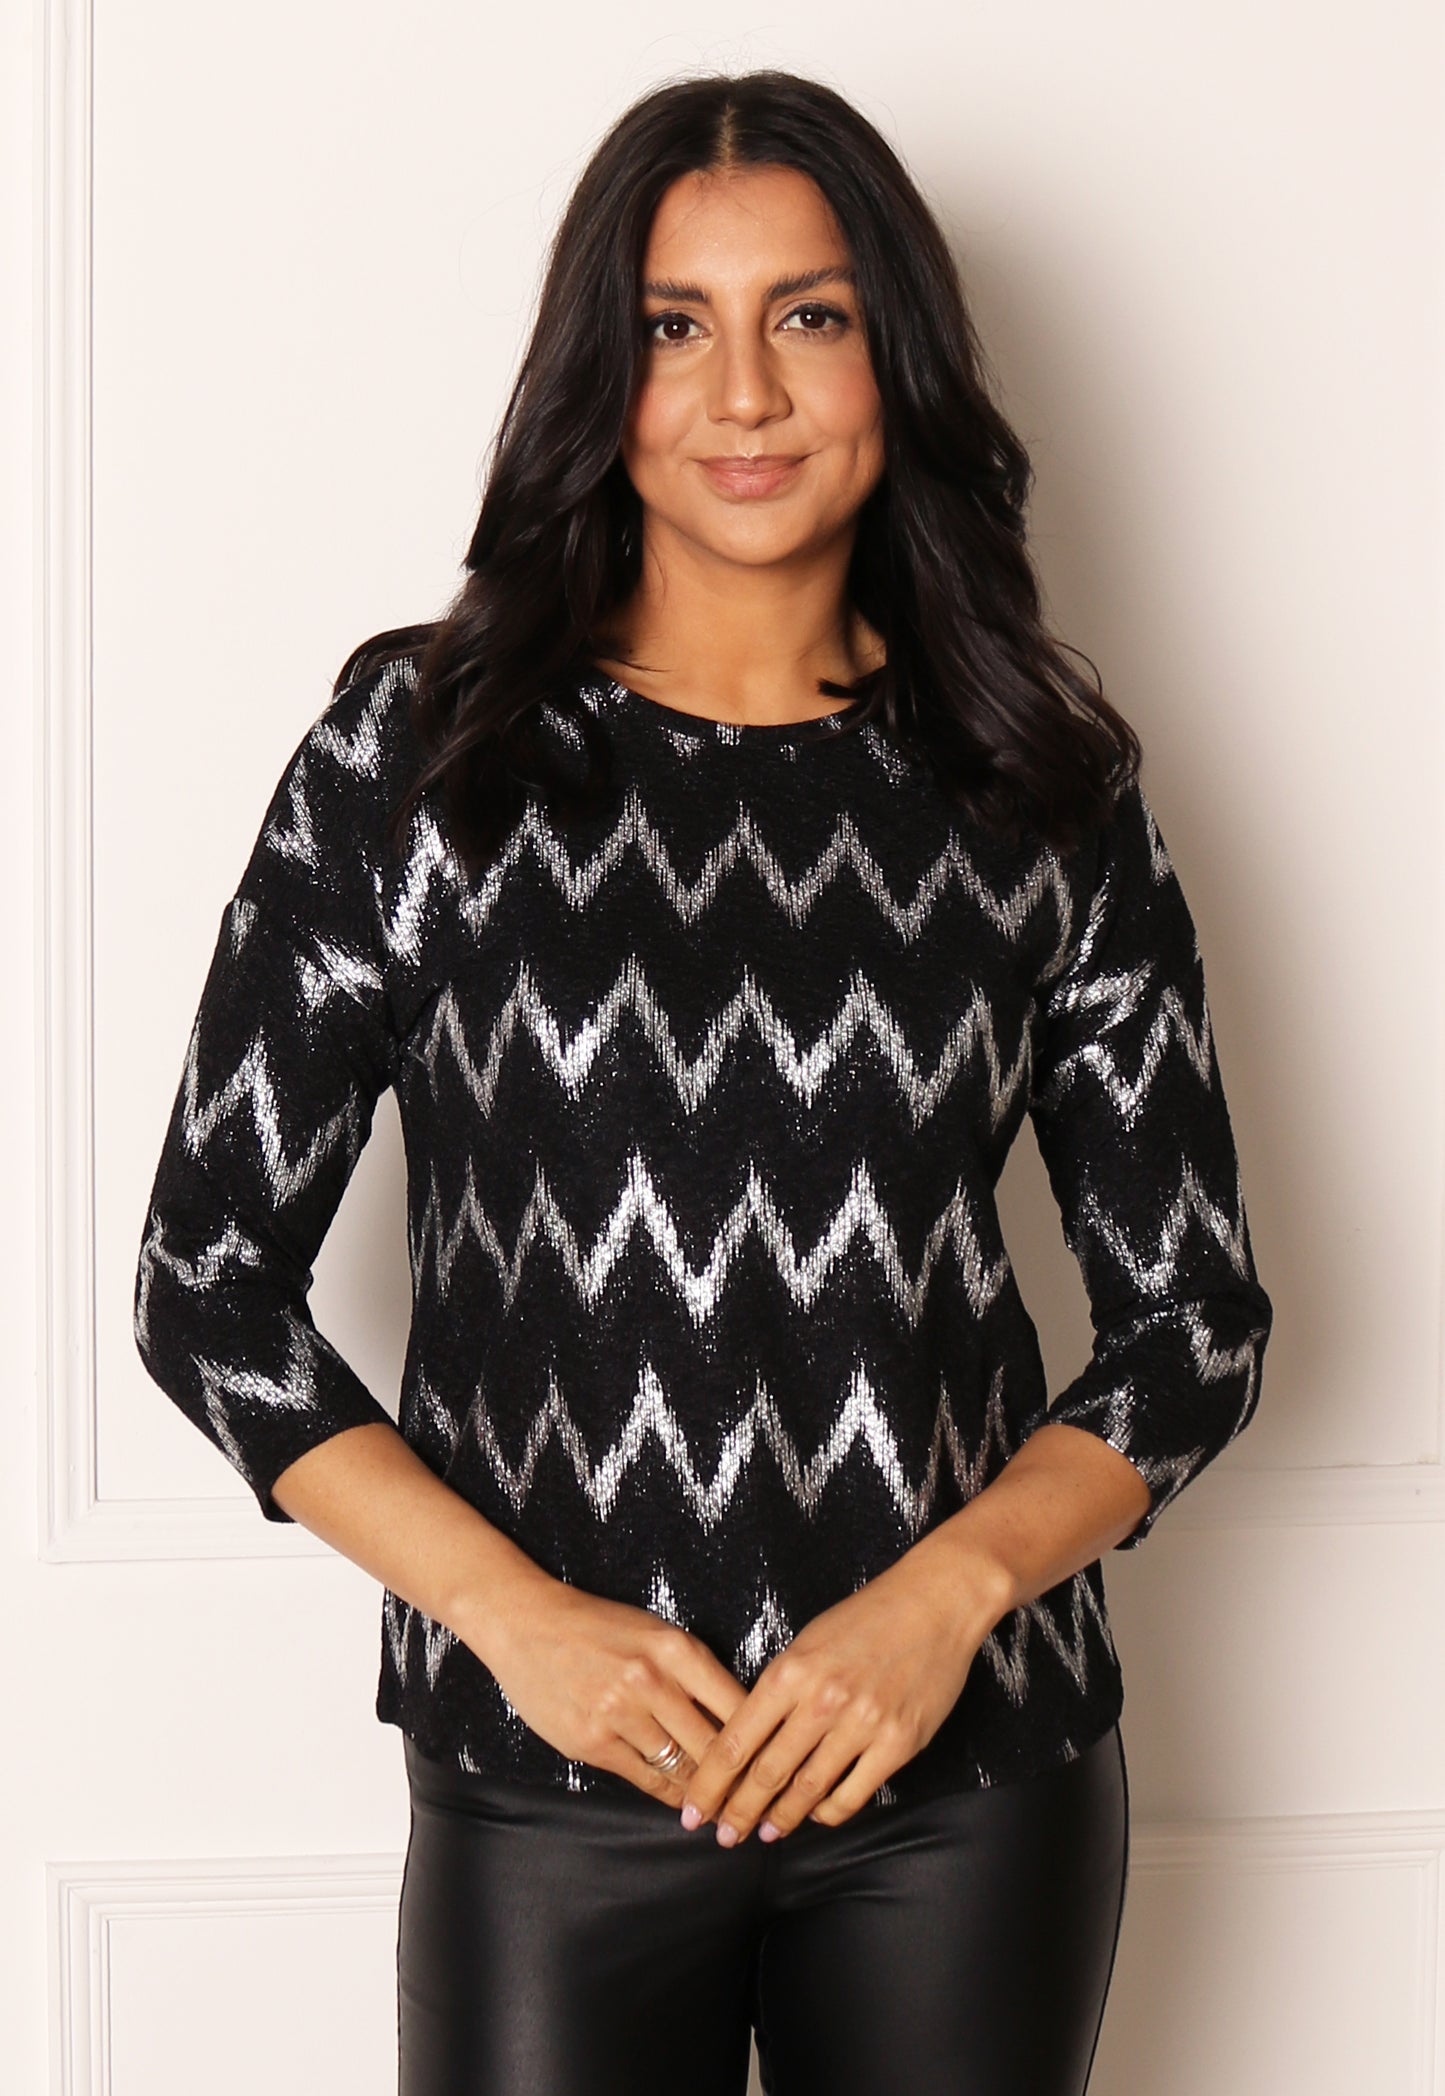 ONLY Queen Metallic Zig Zag Top with Three Quarter Sleeves in Silver & Black - concretebartops